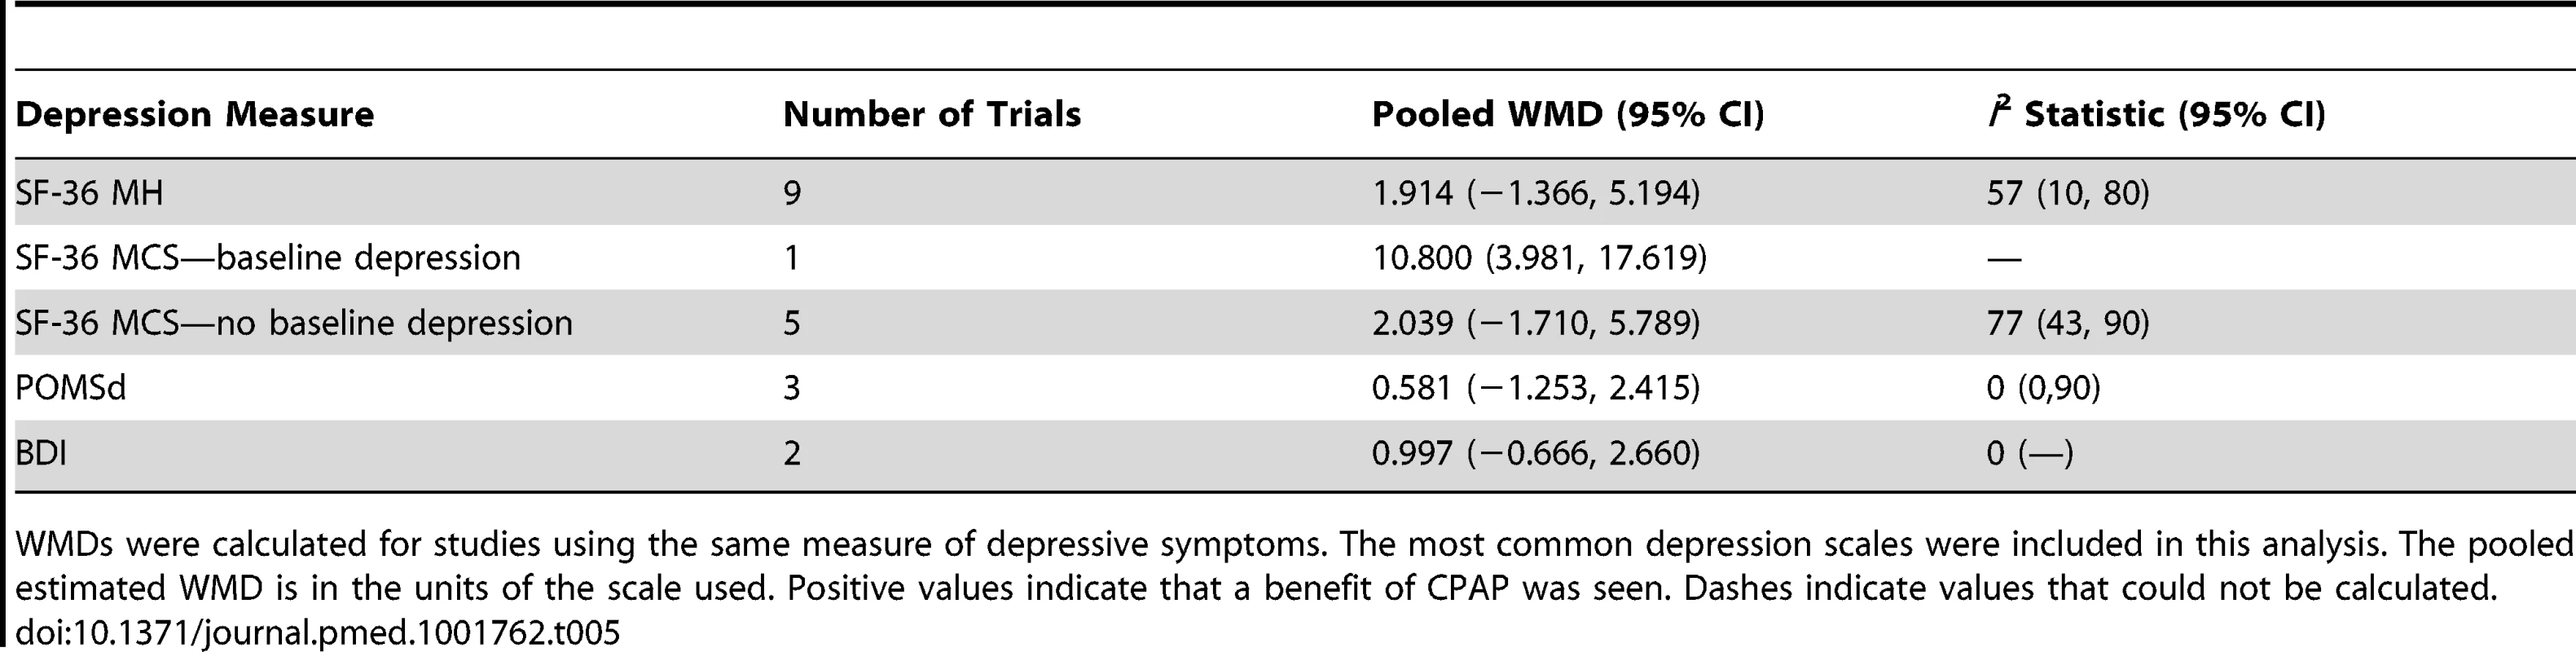 Pooled weighted mean differences in depression score for CPAP treatment.